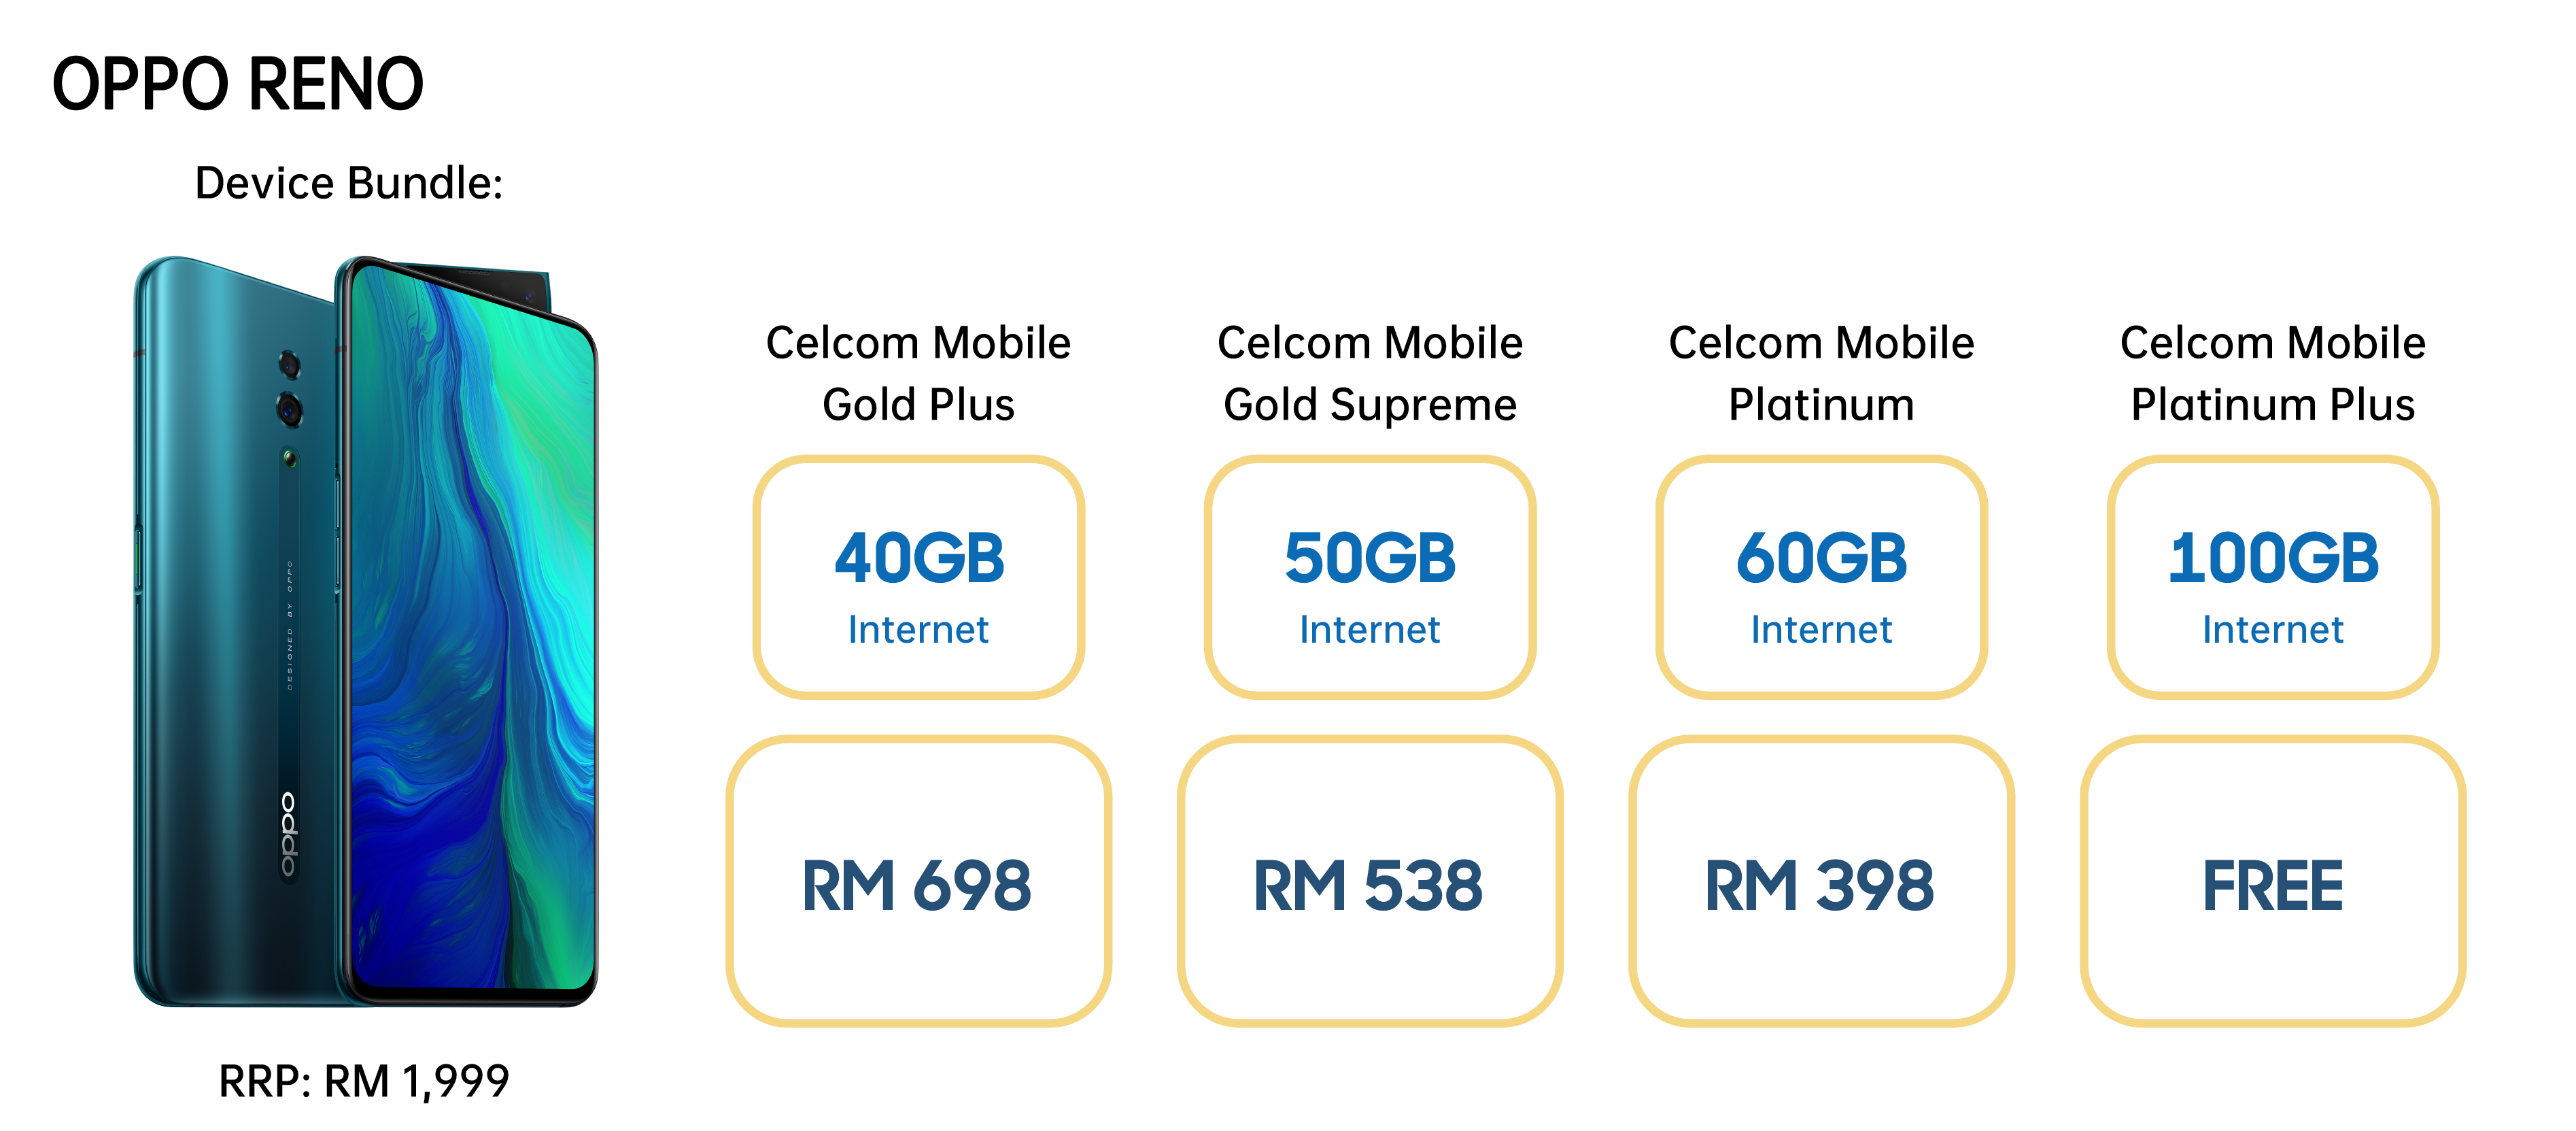 Own the latest OPPO Reno Absolutely Free with Celcom Mobile Plans